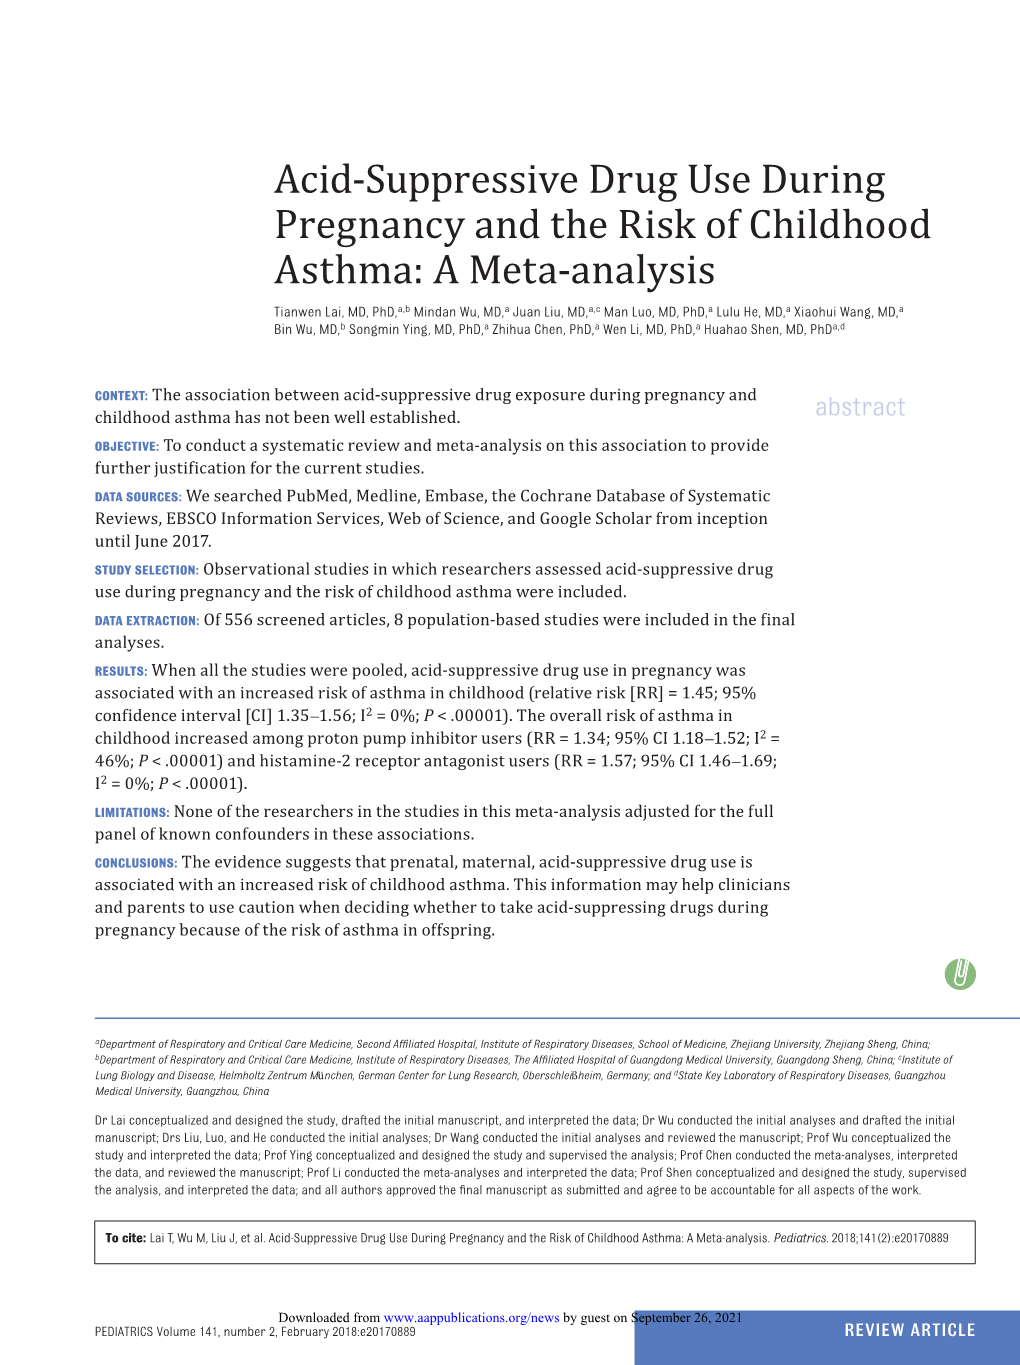 Acid-Suppressive Drug Use During Pregnancy and the Risk of Childhood Asthma: a Meta-Analysis